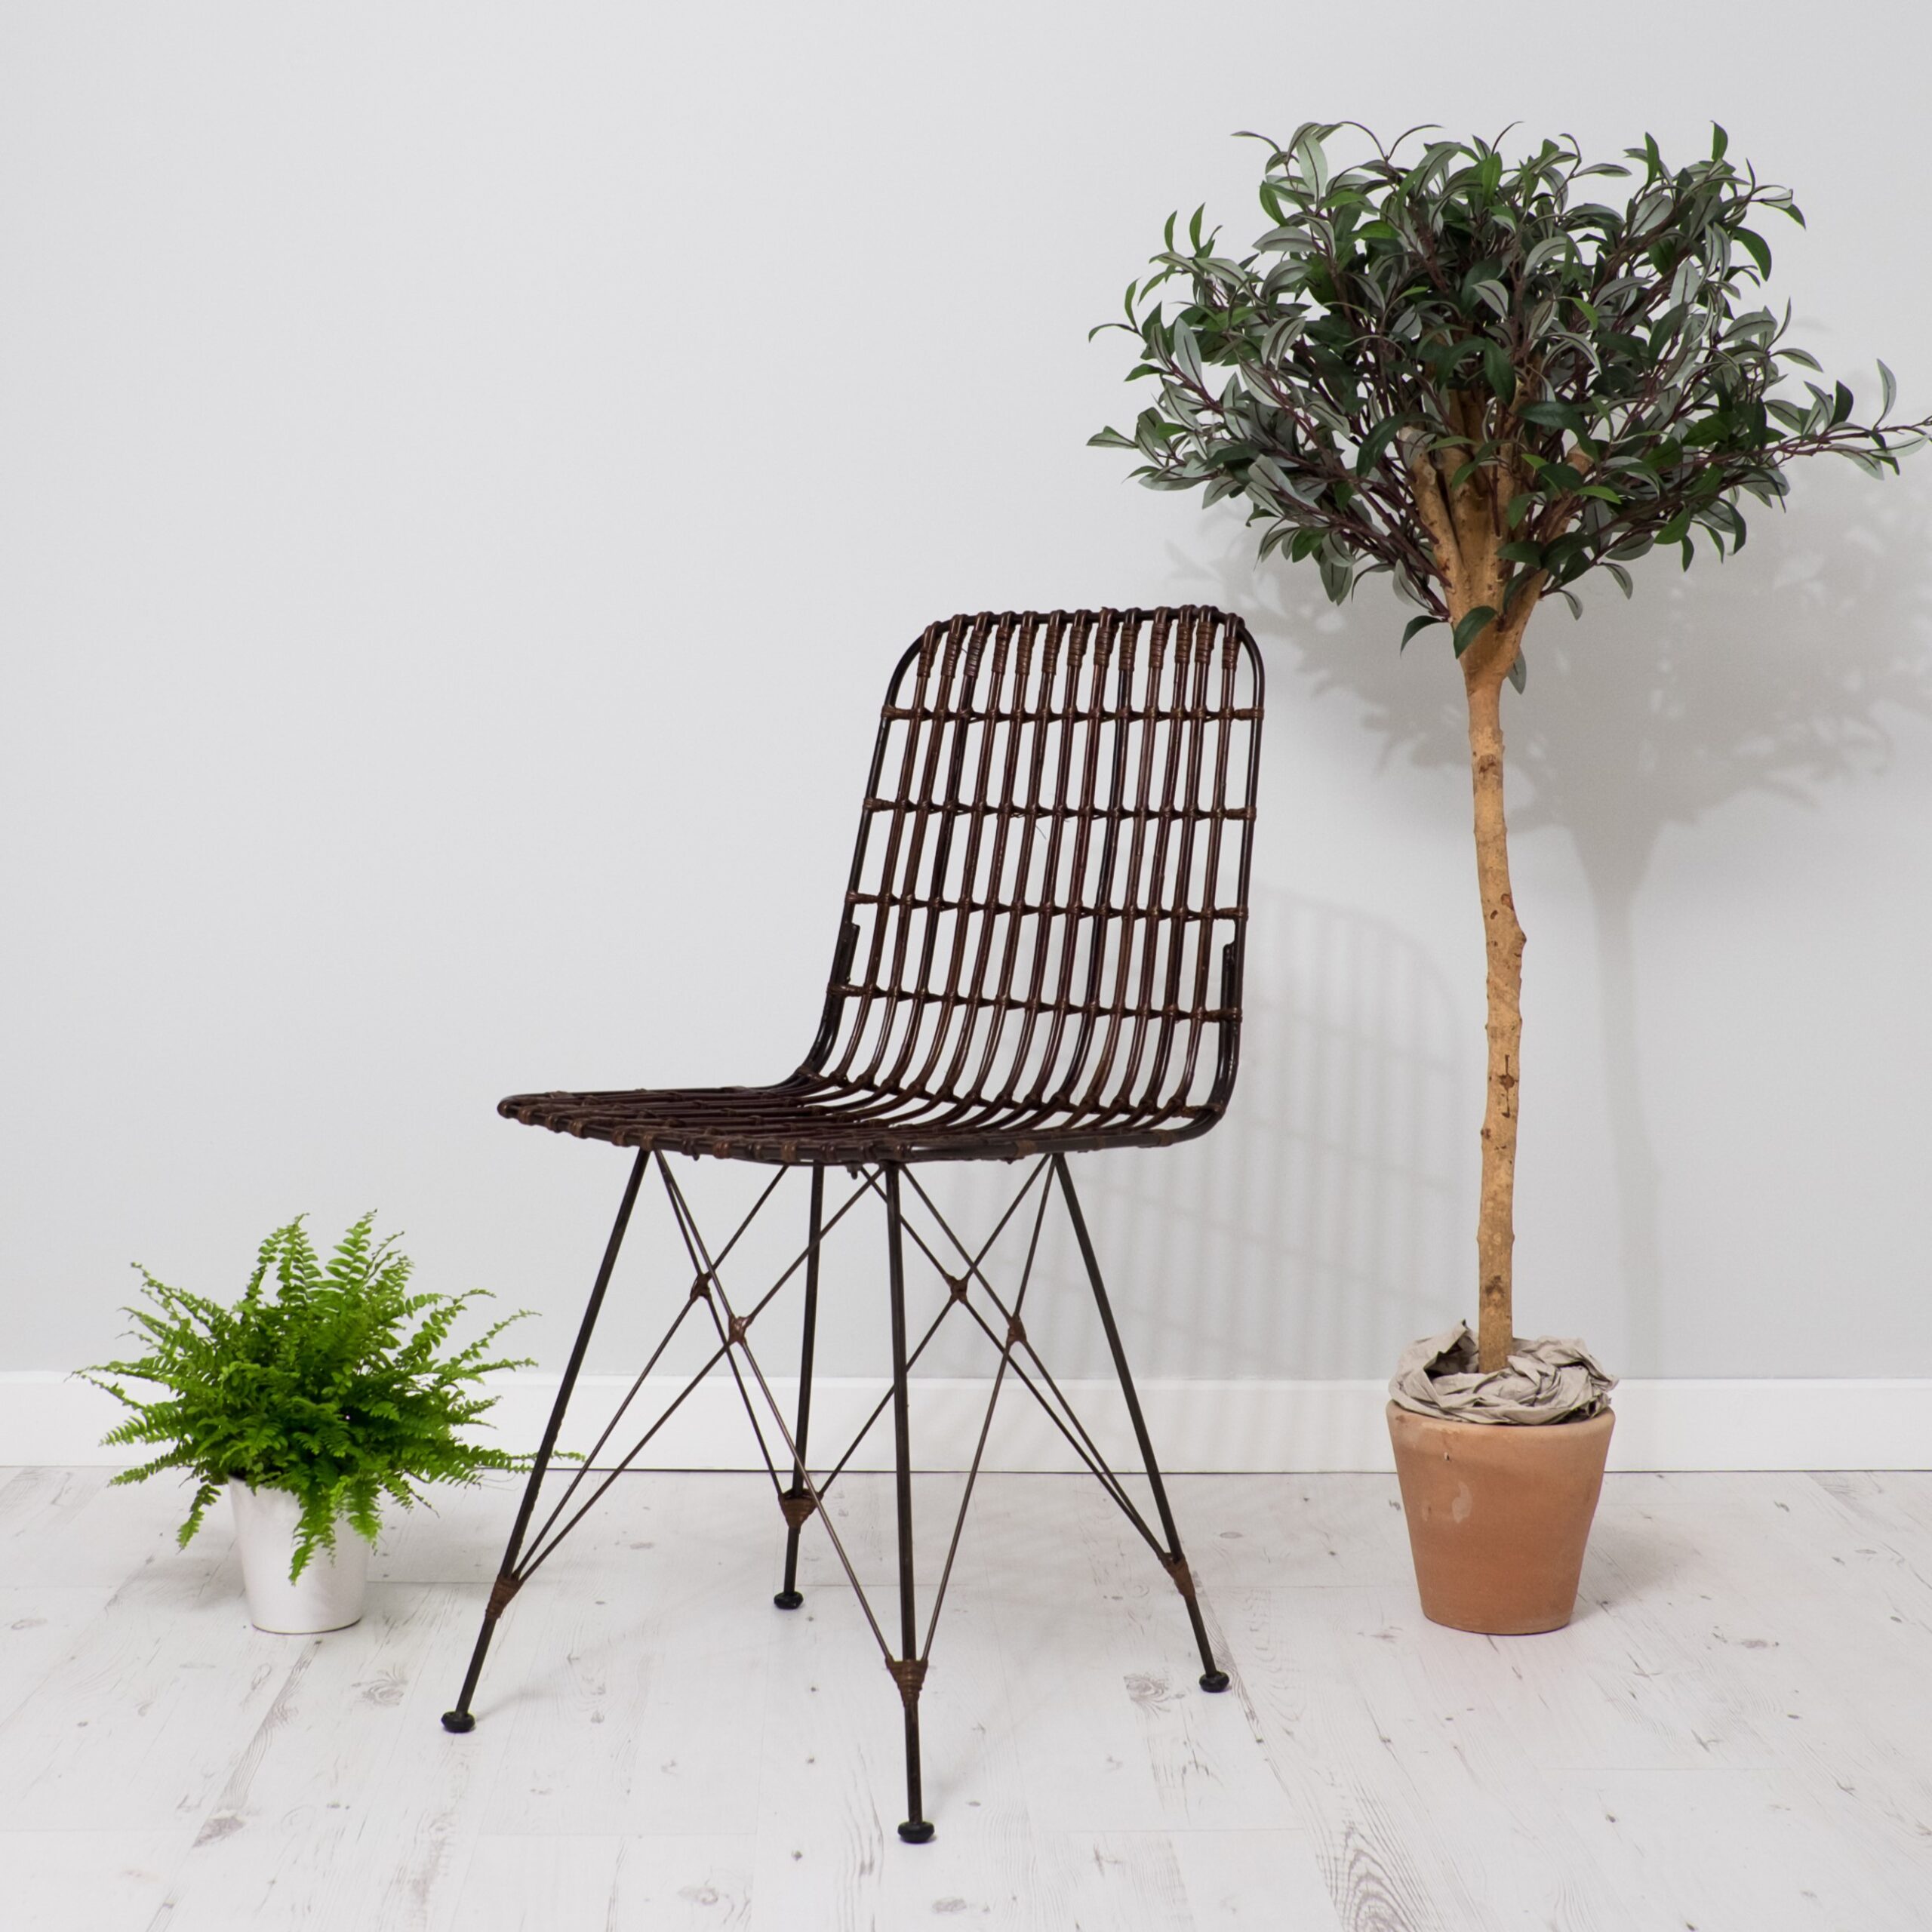 Wicker brown dining chair on white floor with olive tree and potted plant